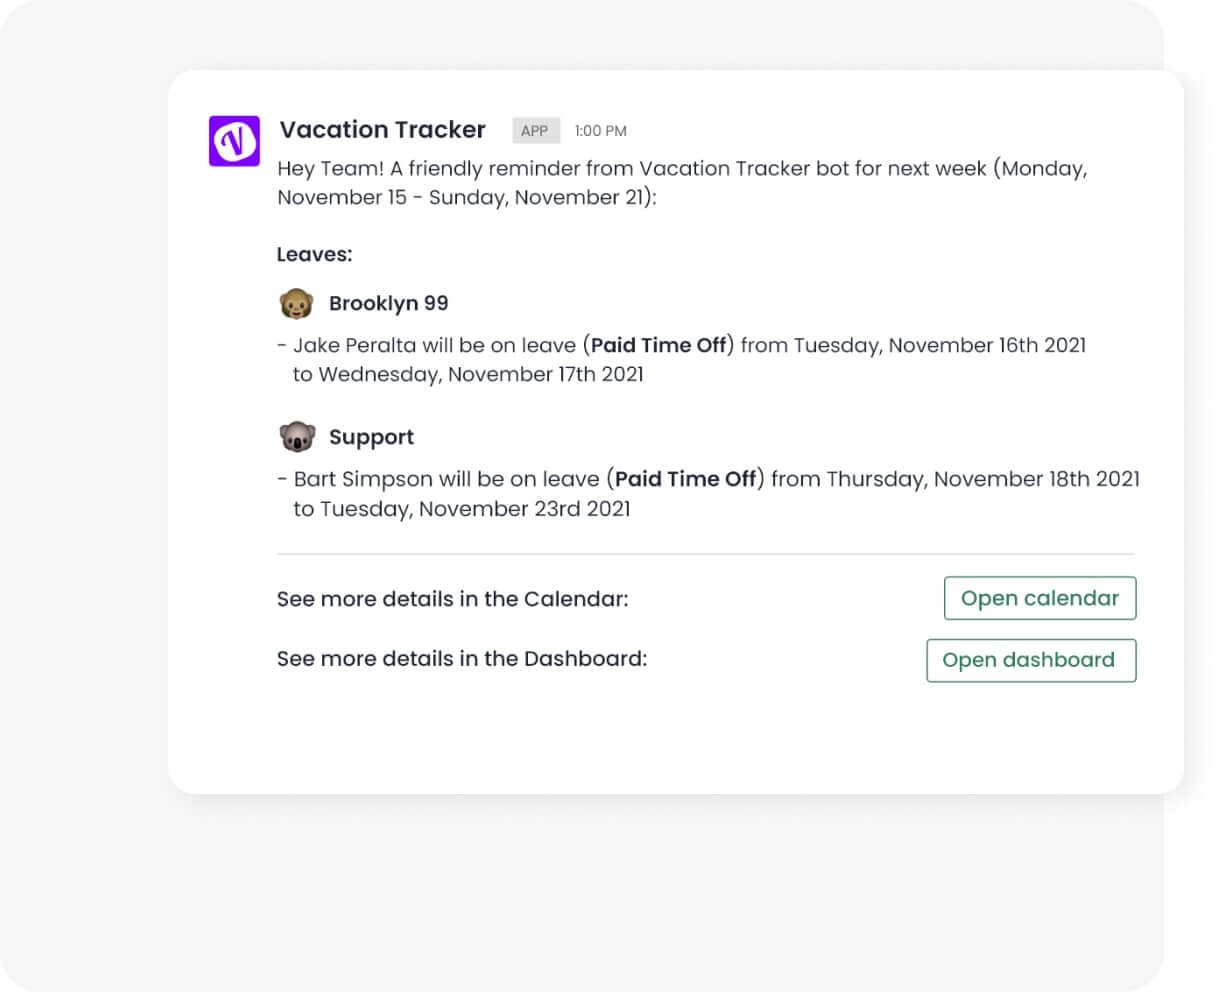 Notify team members of scheduled leaves and holidays